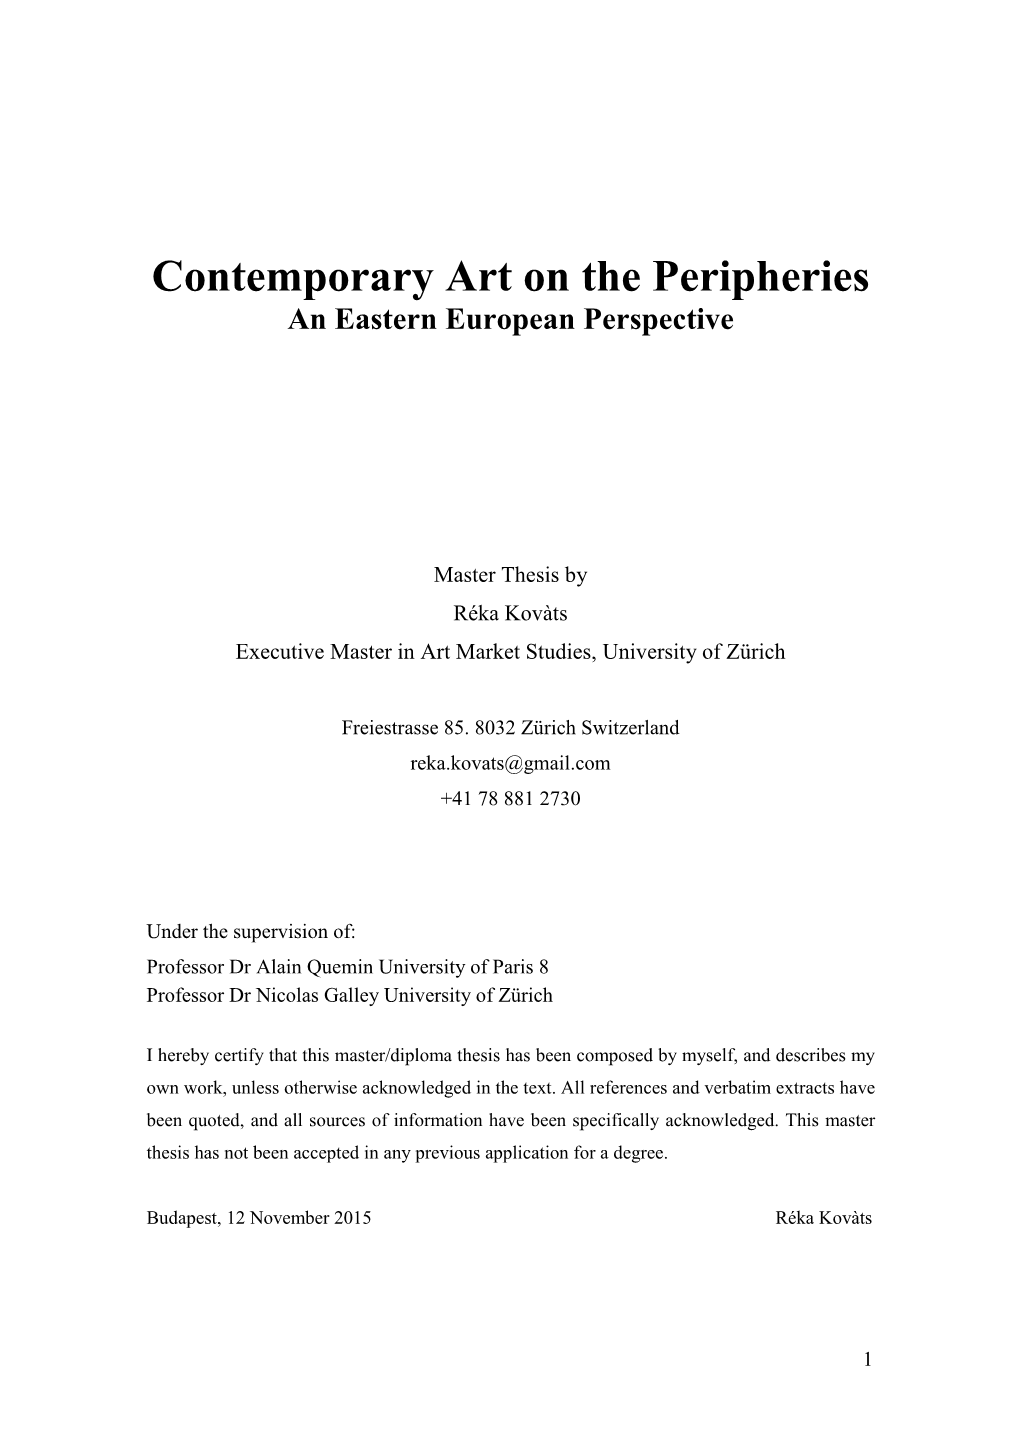 Contemporary Art on the Peripheries an Eastern European Perspective